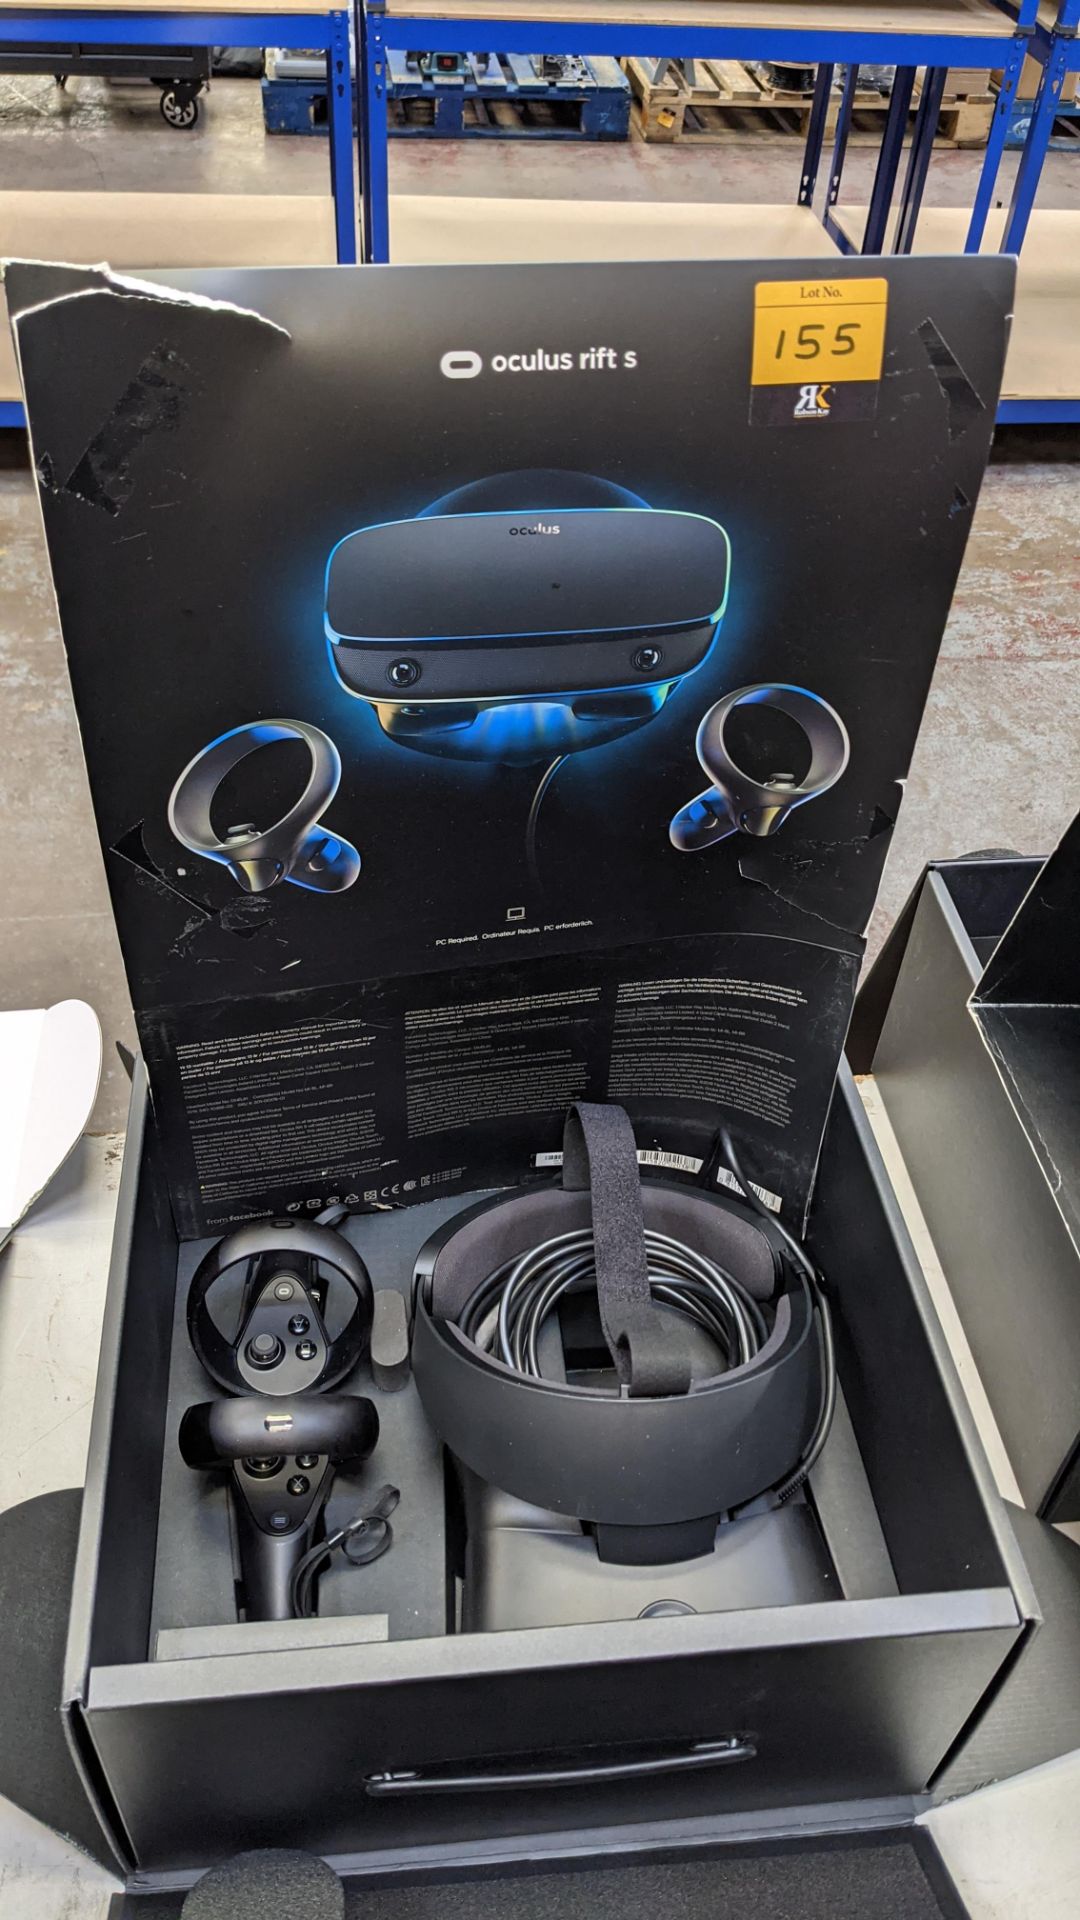 Oculus Rift S virtual reality system comprising headset, controllers, cables, adapters & more